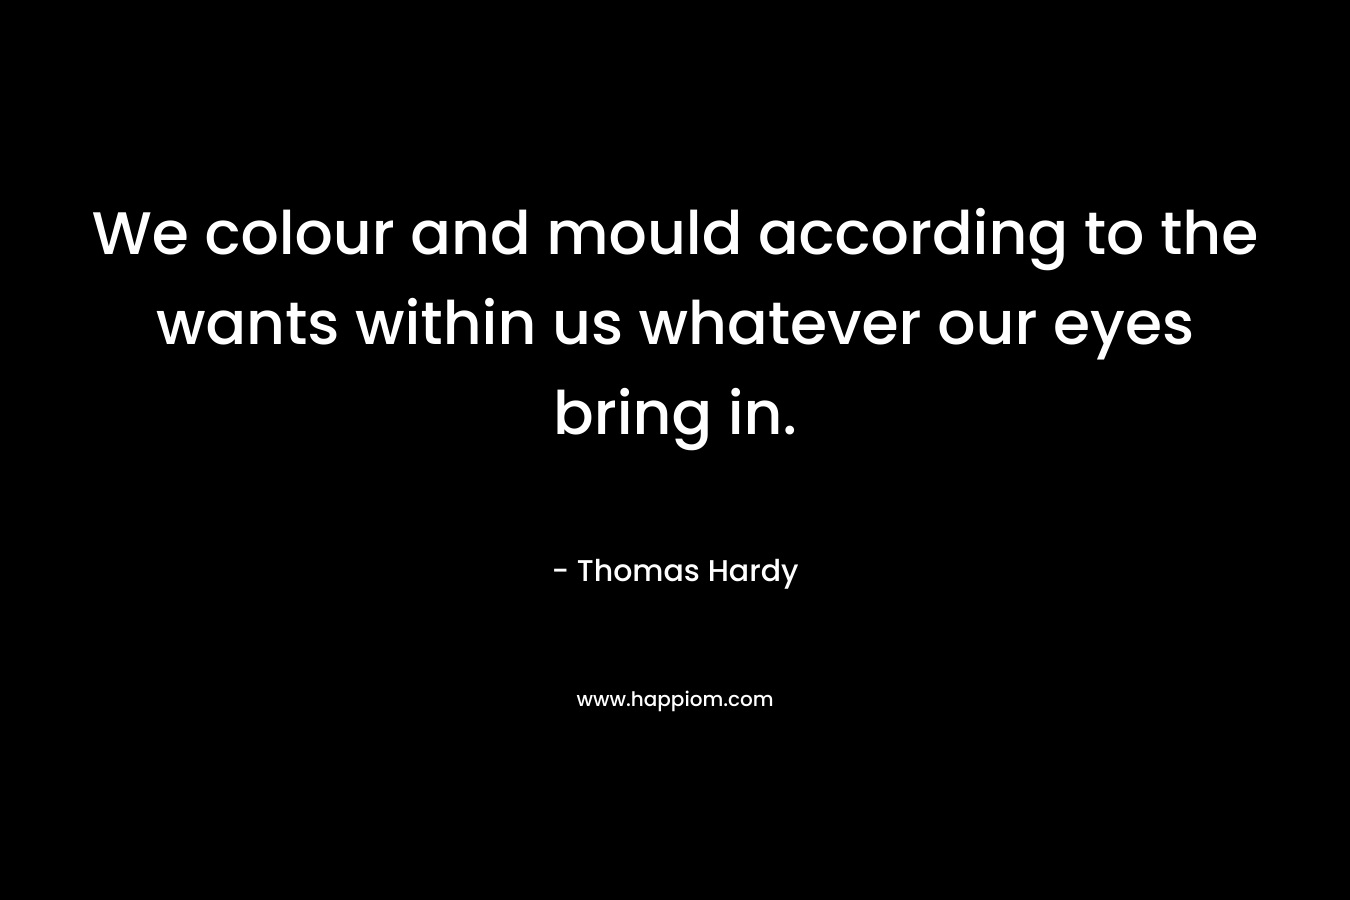 We colour and mould according to the wants within us whatever our eyes bring in.